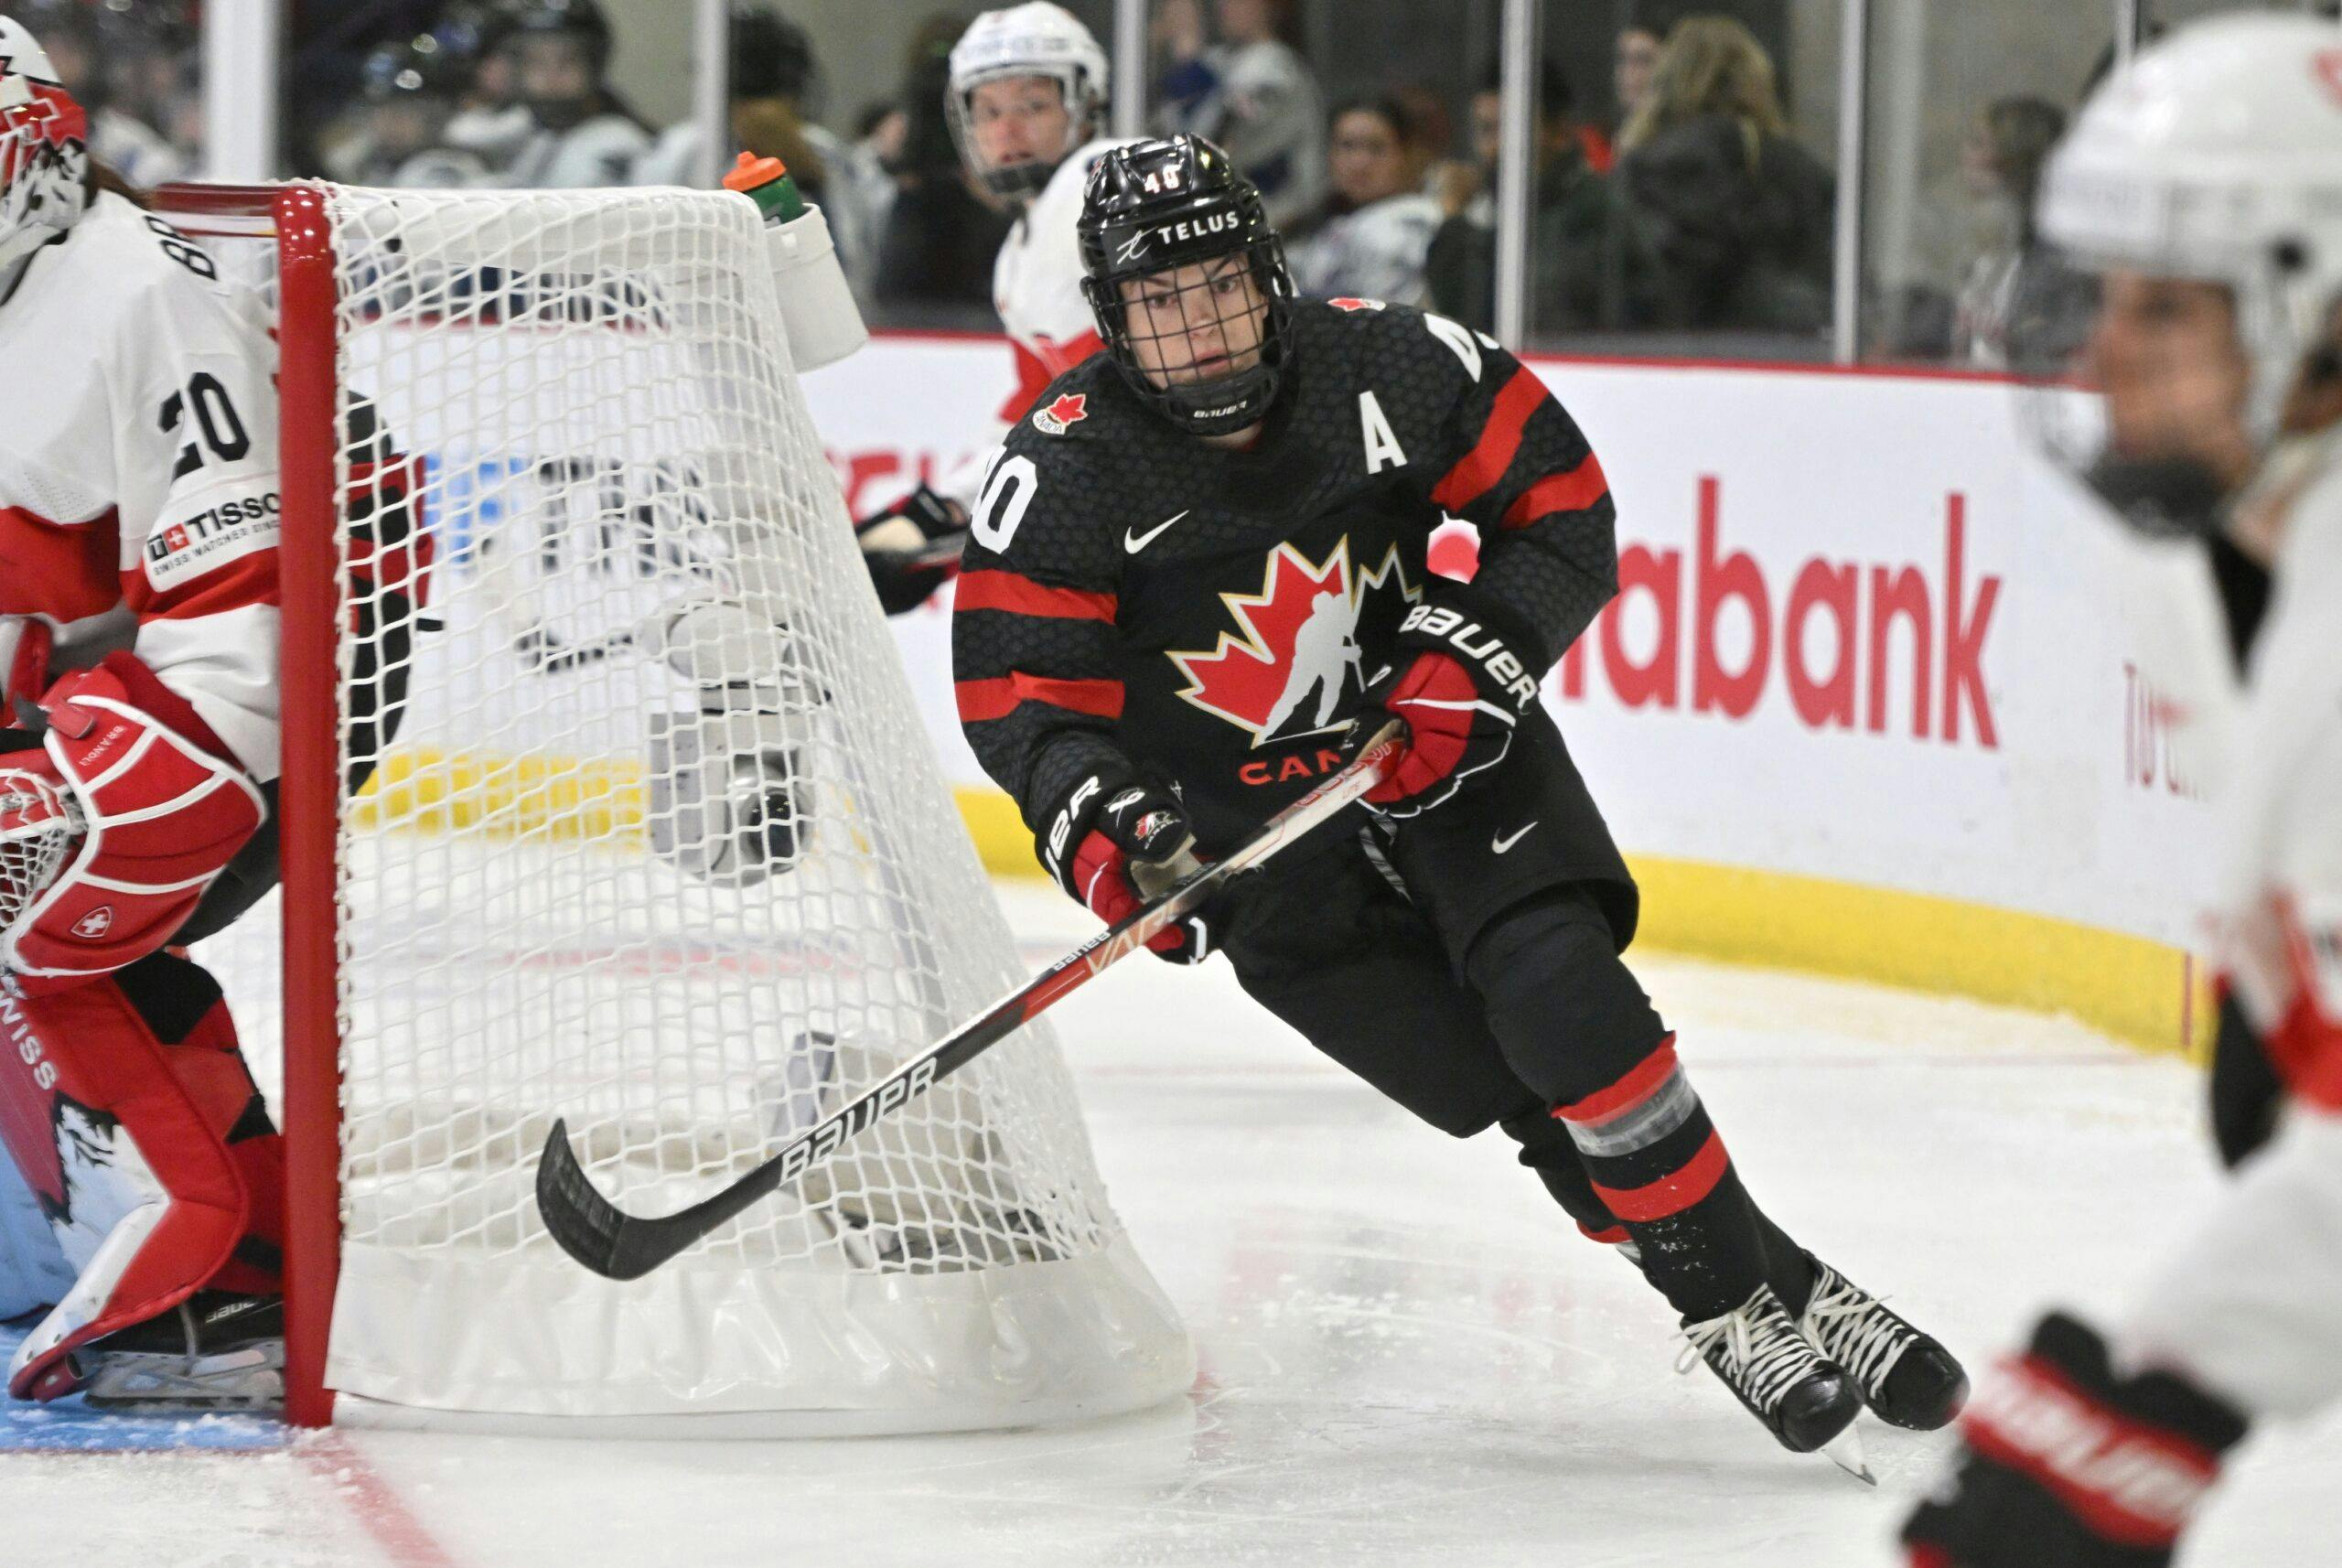 Women’s Worlds: Canada snags semifinal spot after surviving Swedish scare